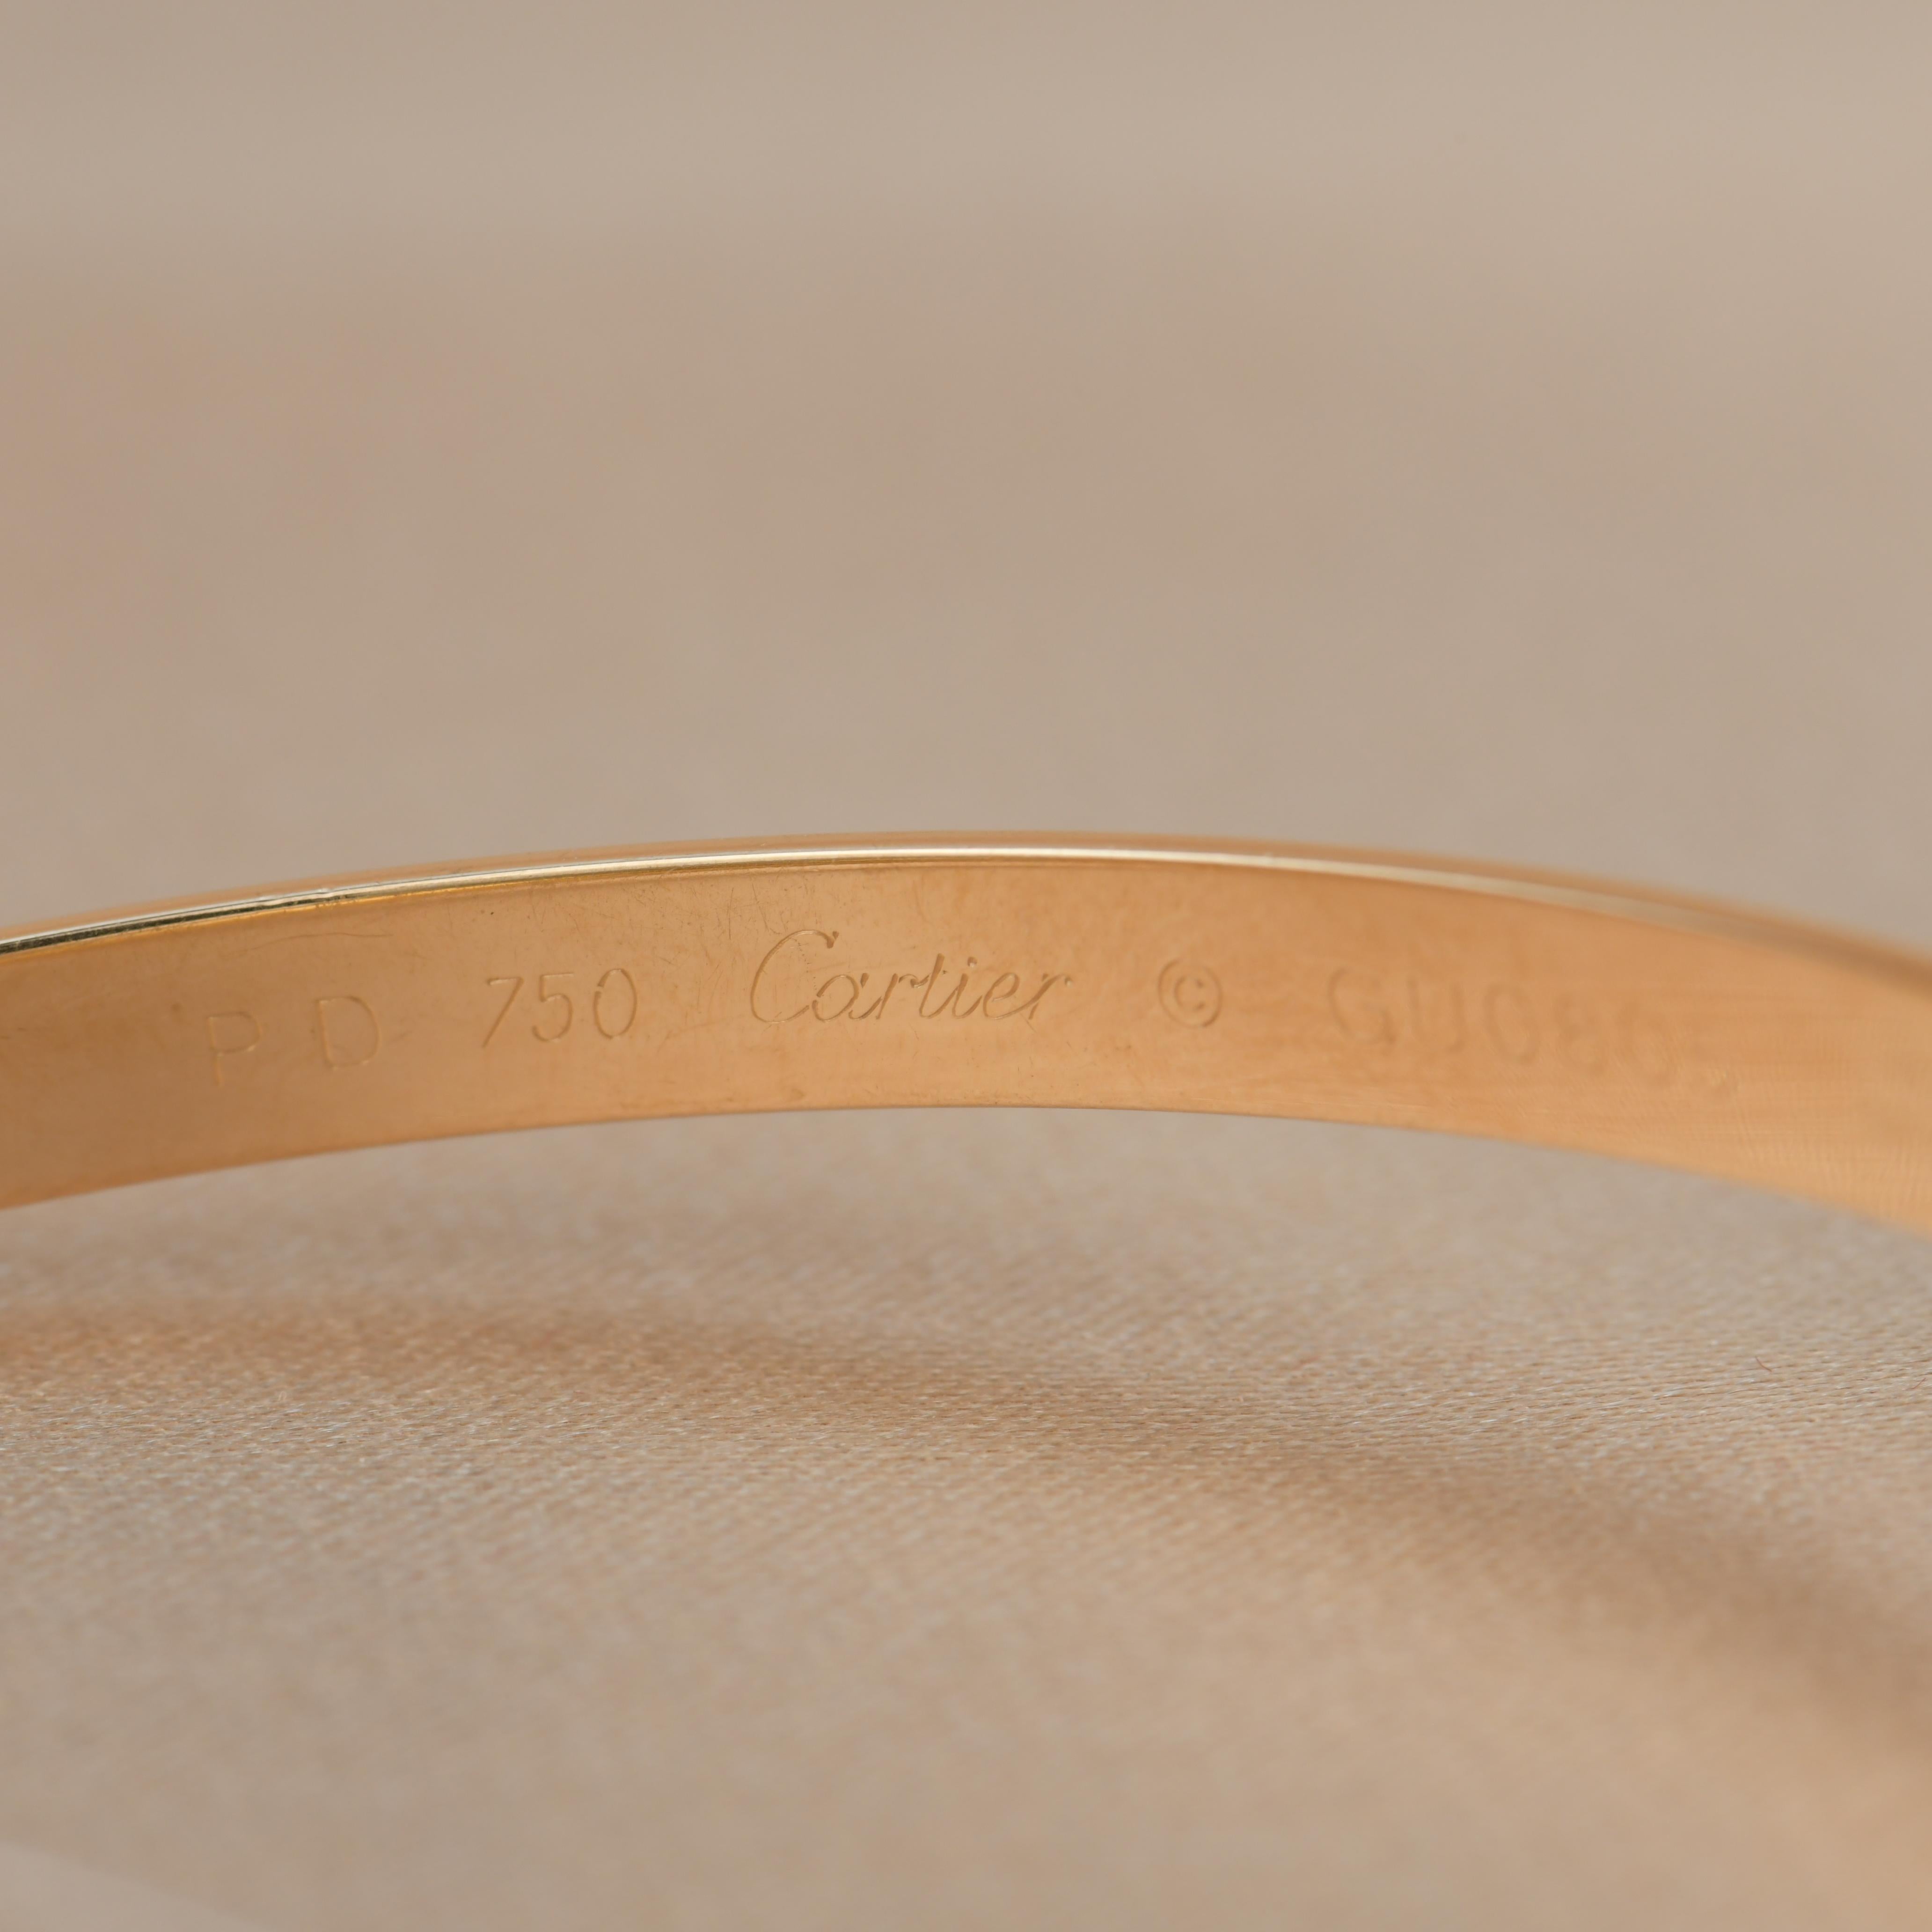 Cartier Trinity 18K White, Yellow and Rose Gold Bracelet 5